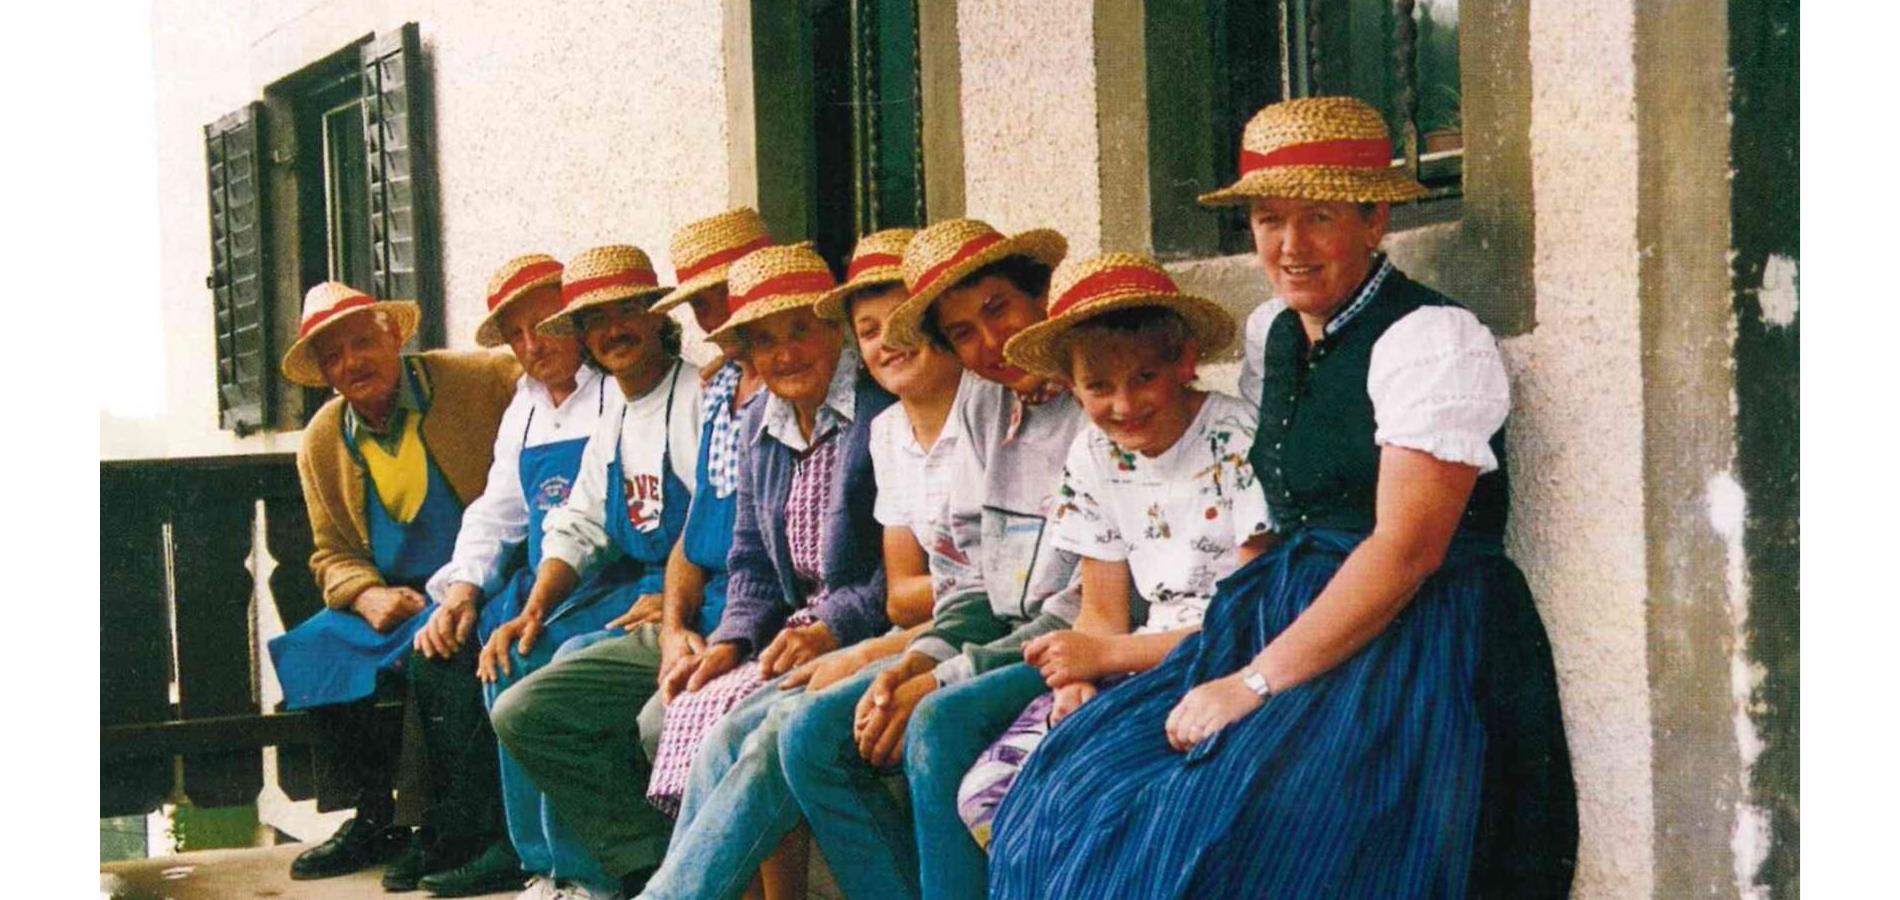 (Not) an old hat: the tradition of straw hats in Hafling and Vöran